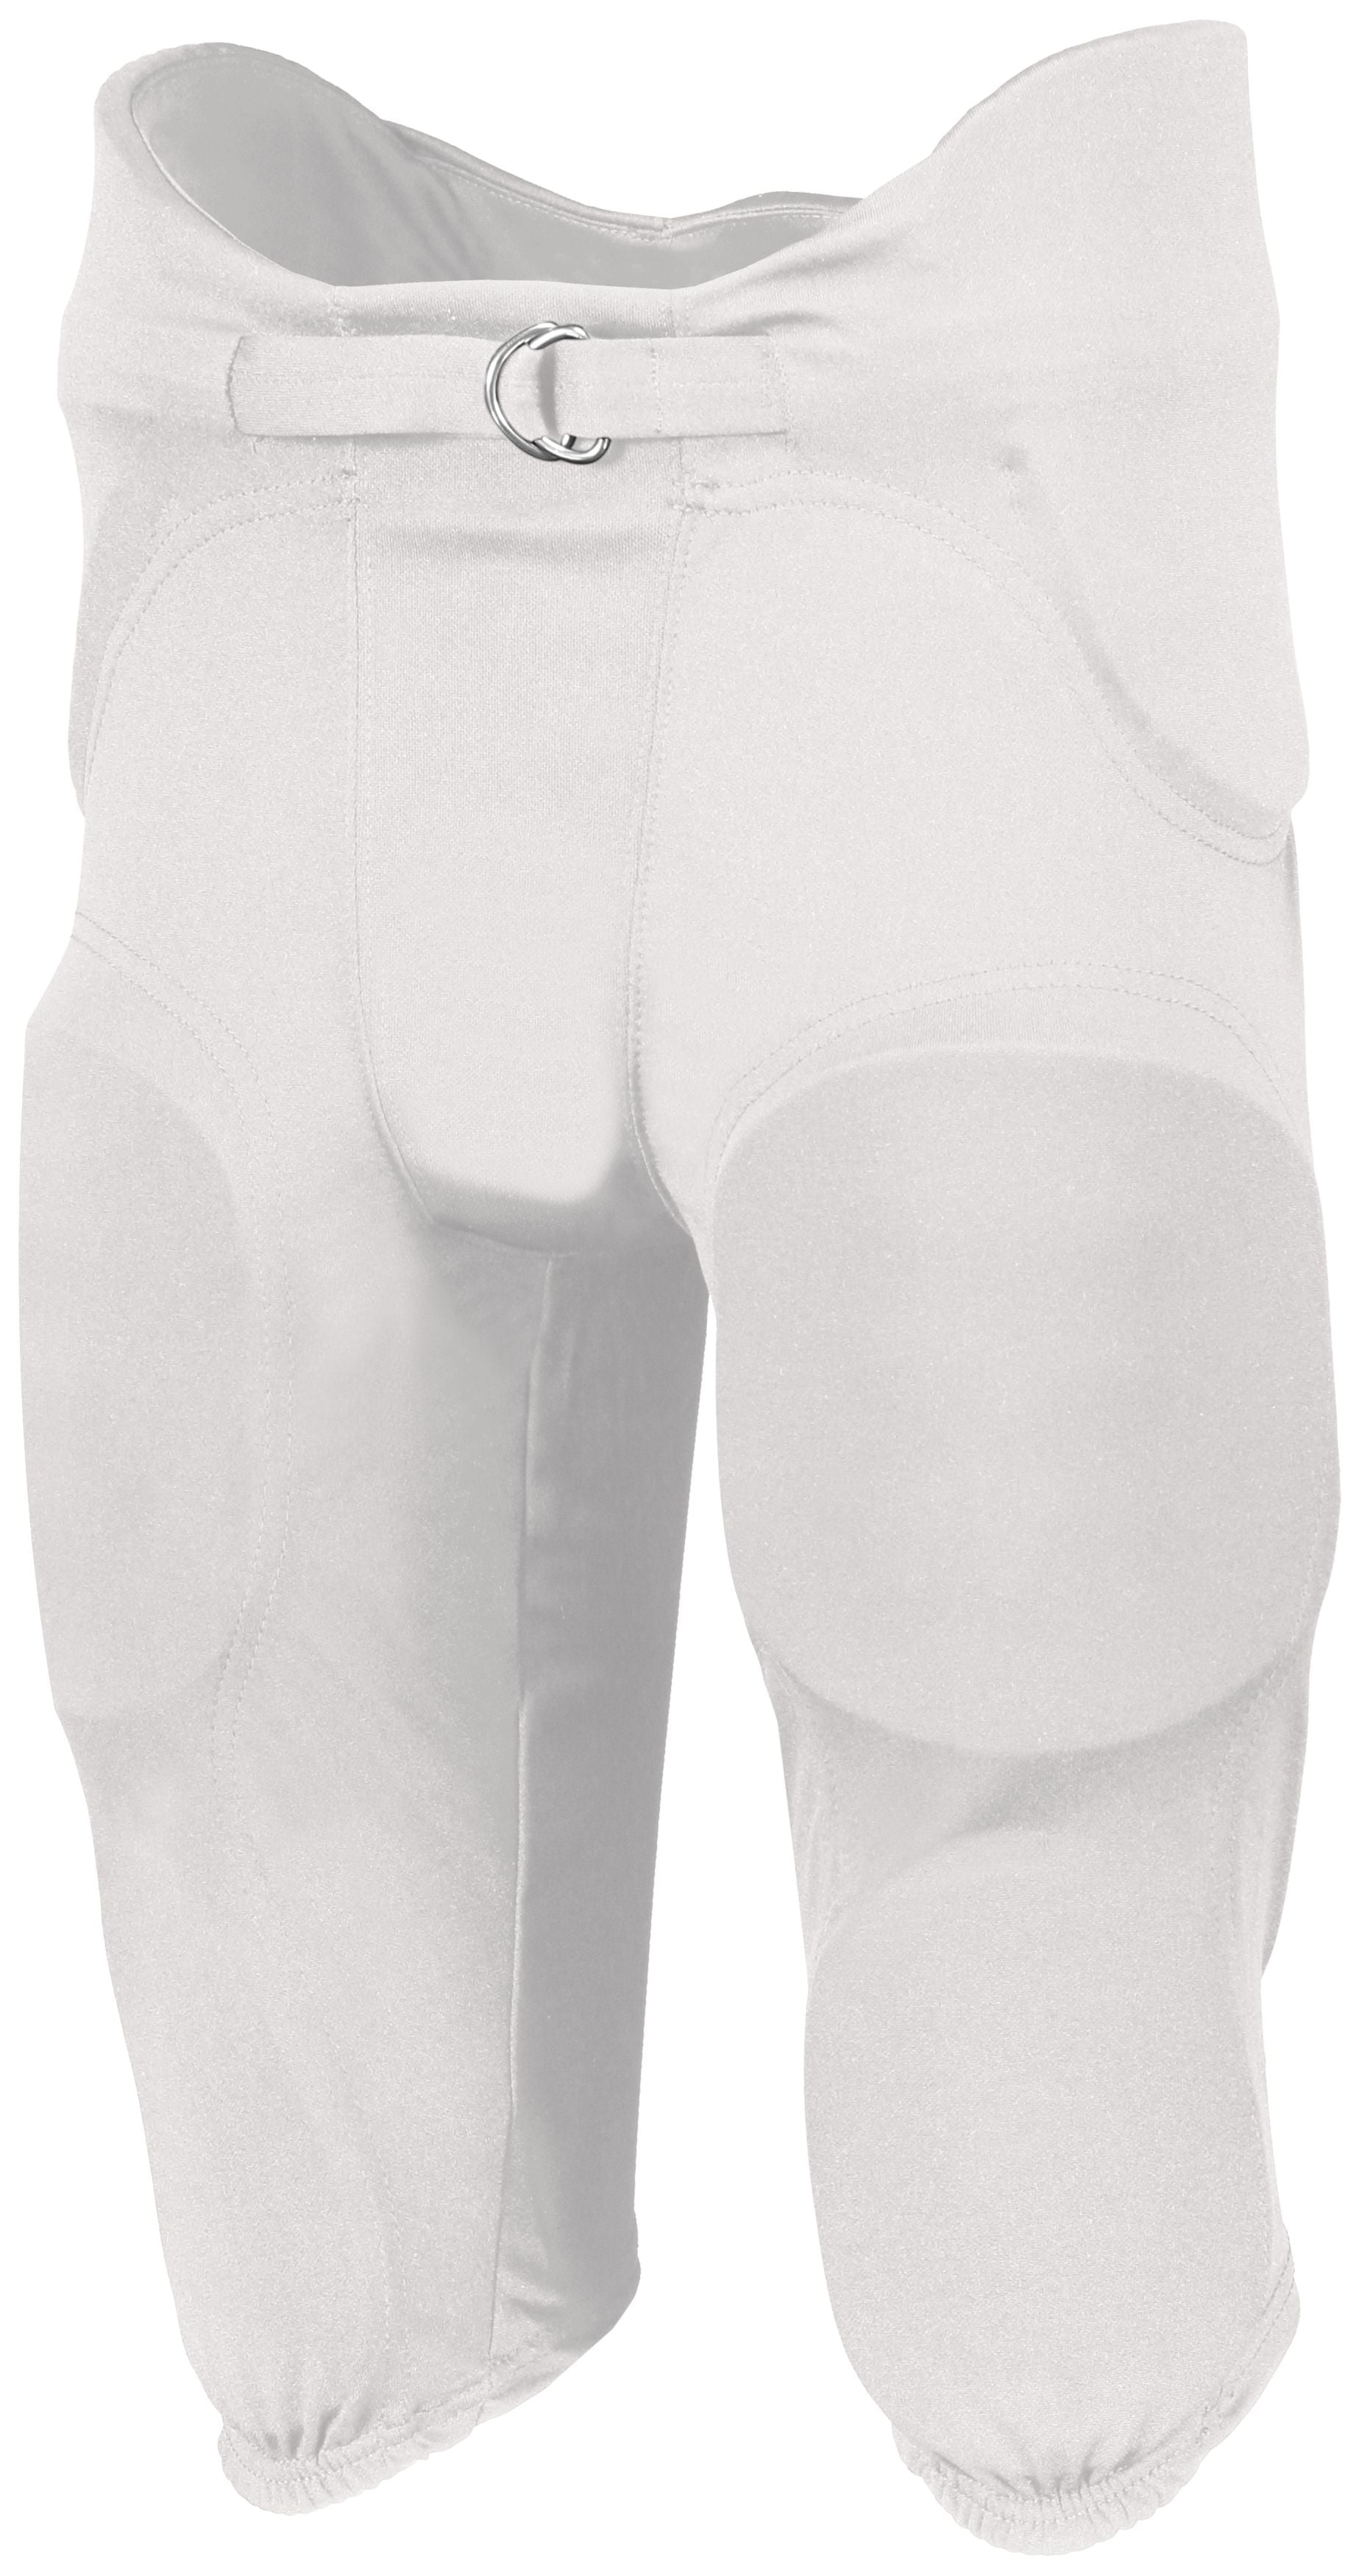 Russell Athletic Youth Integrated 7-Piece Pad Pant in White  -Part of the Youth, Youth-Pants, Pants, Football, Russell-Athletic-Products, All-Sports, All-Sports-1 product lines at KanaleyCreations.com